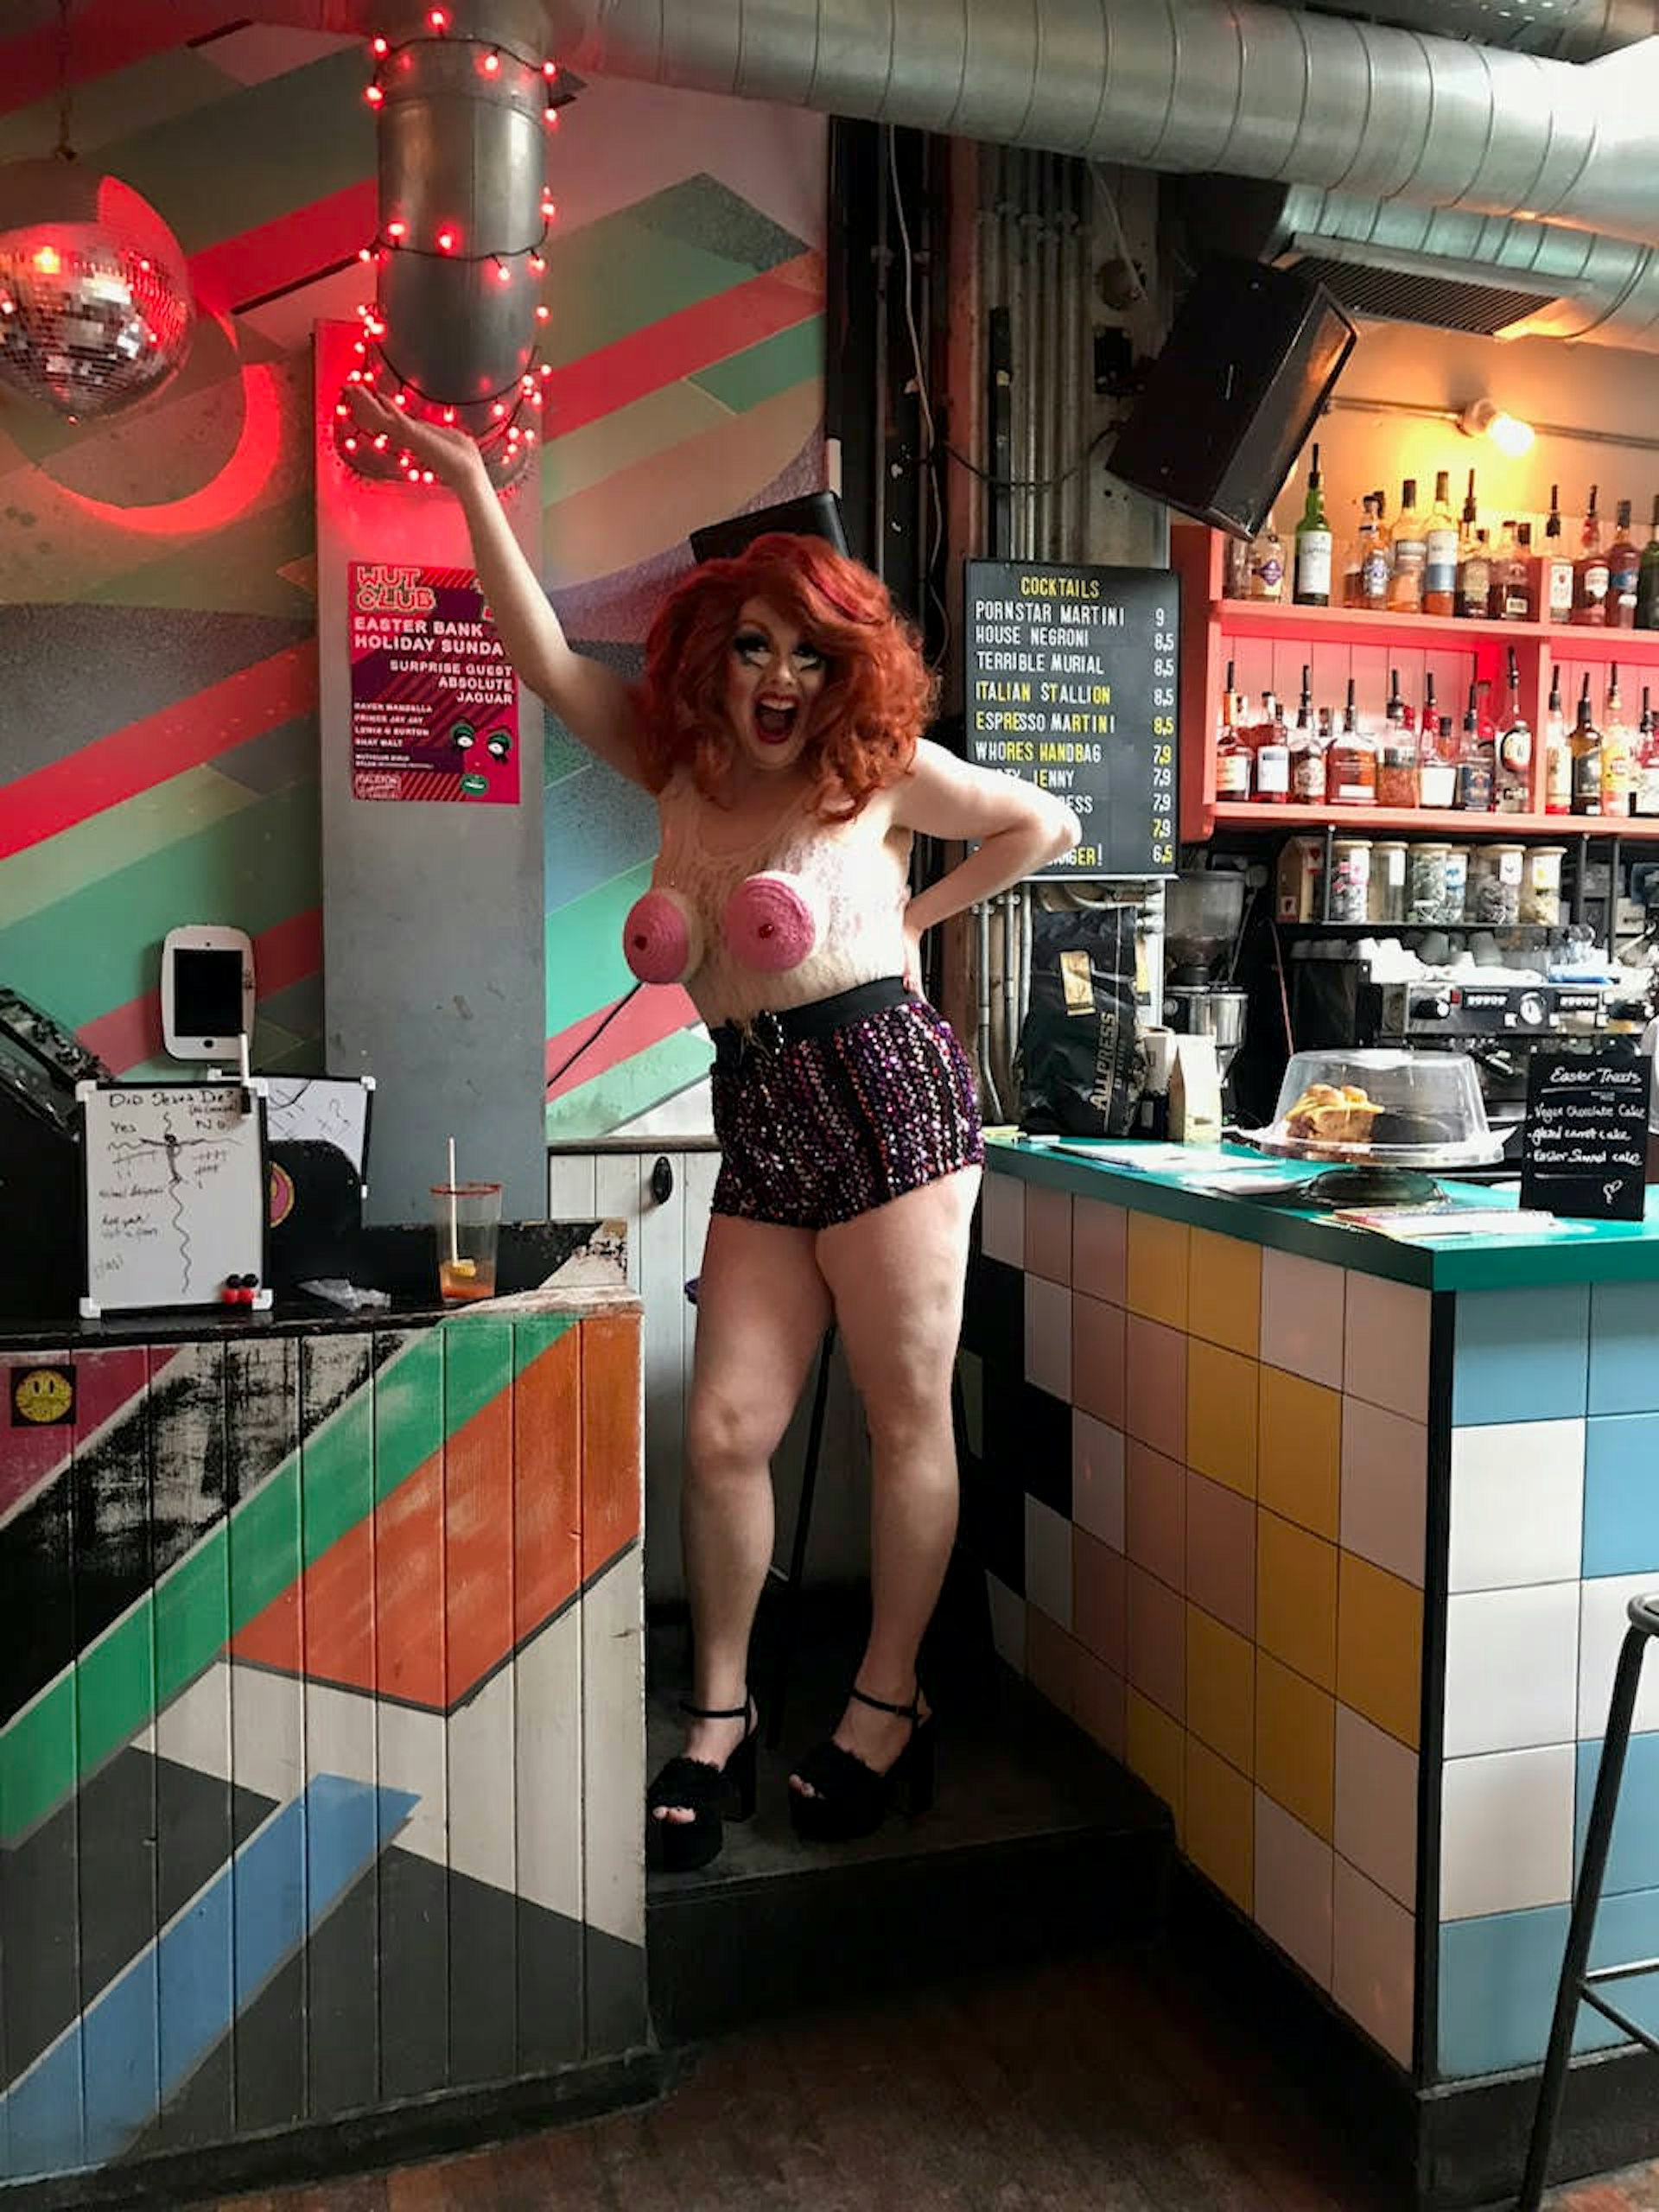 A drag queen strikes a pose wearing a knitted top with pink boobs and knitted hotpants as well as full make up and a red-haired wig. Dalston Superstore has a bar area with colourful tiles and neon lights on the wall. London drag brunches